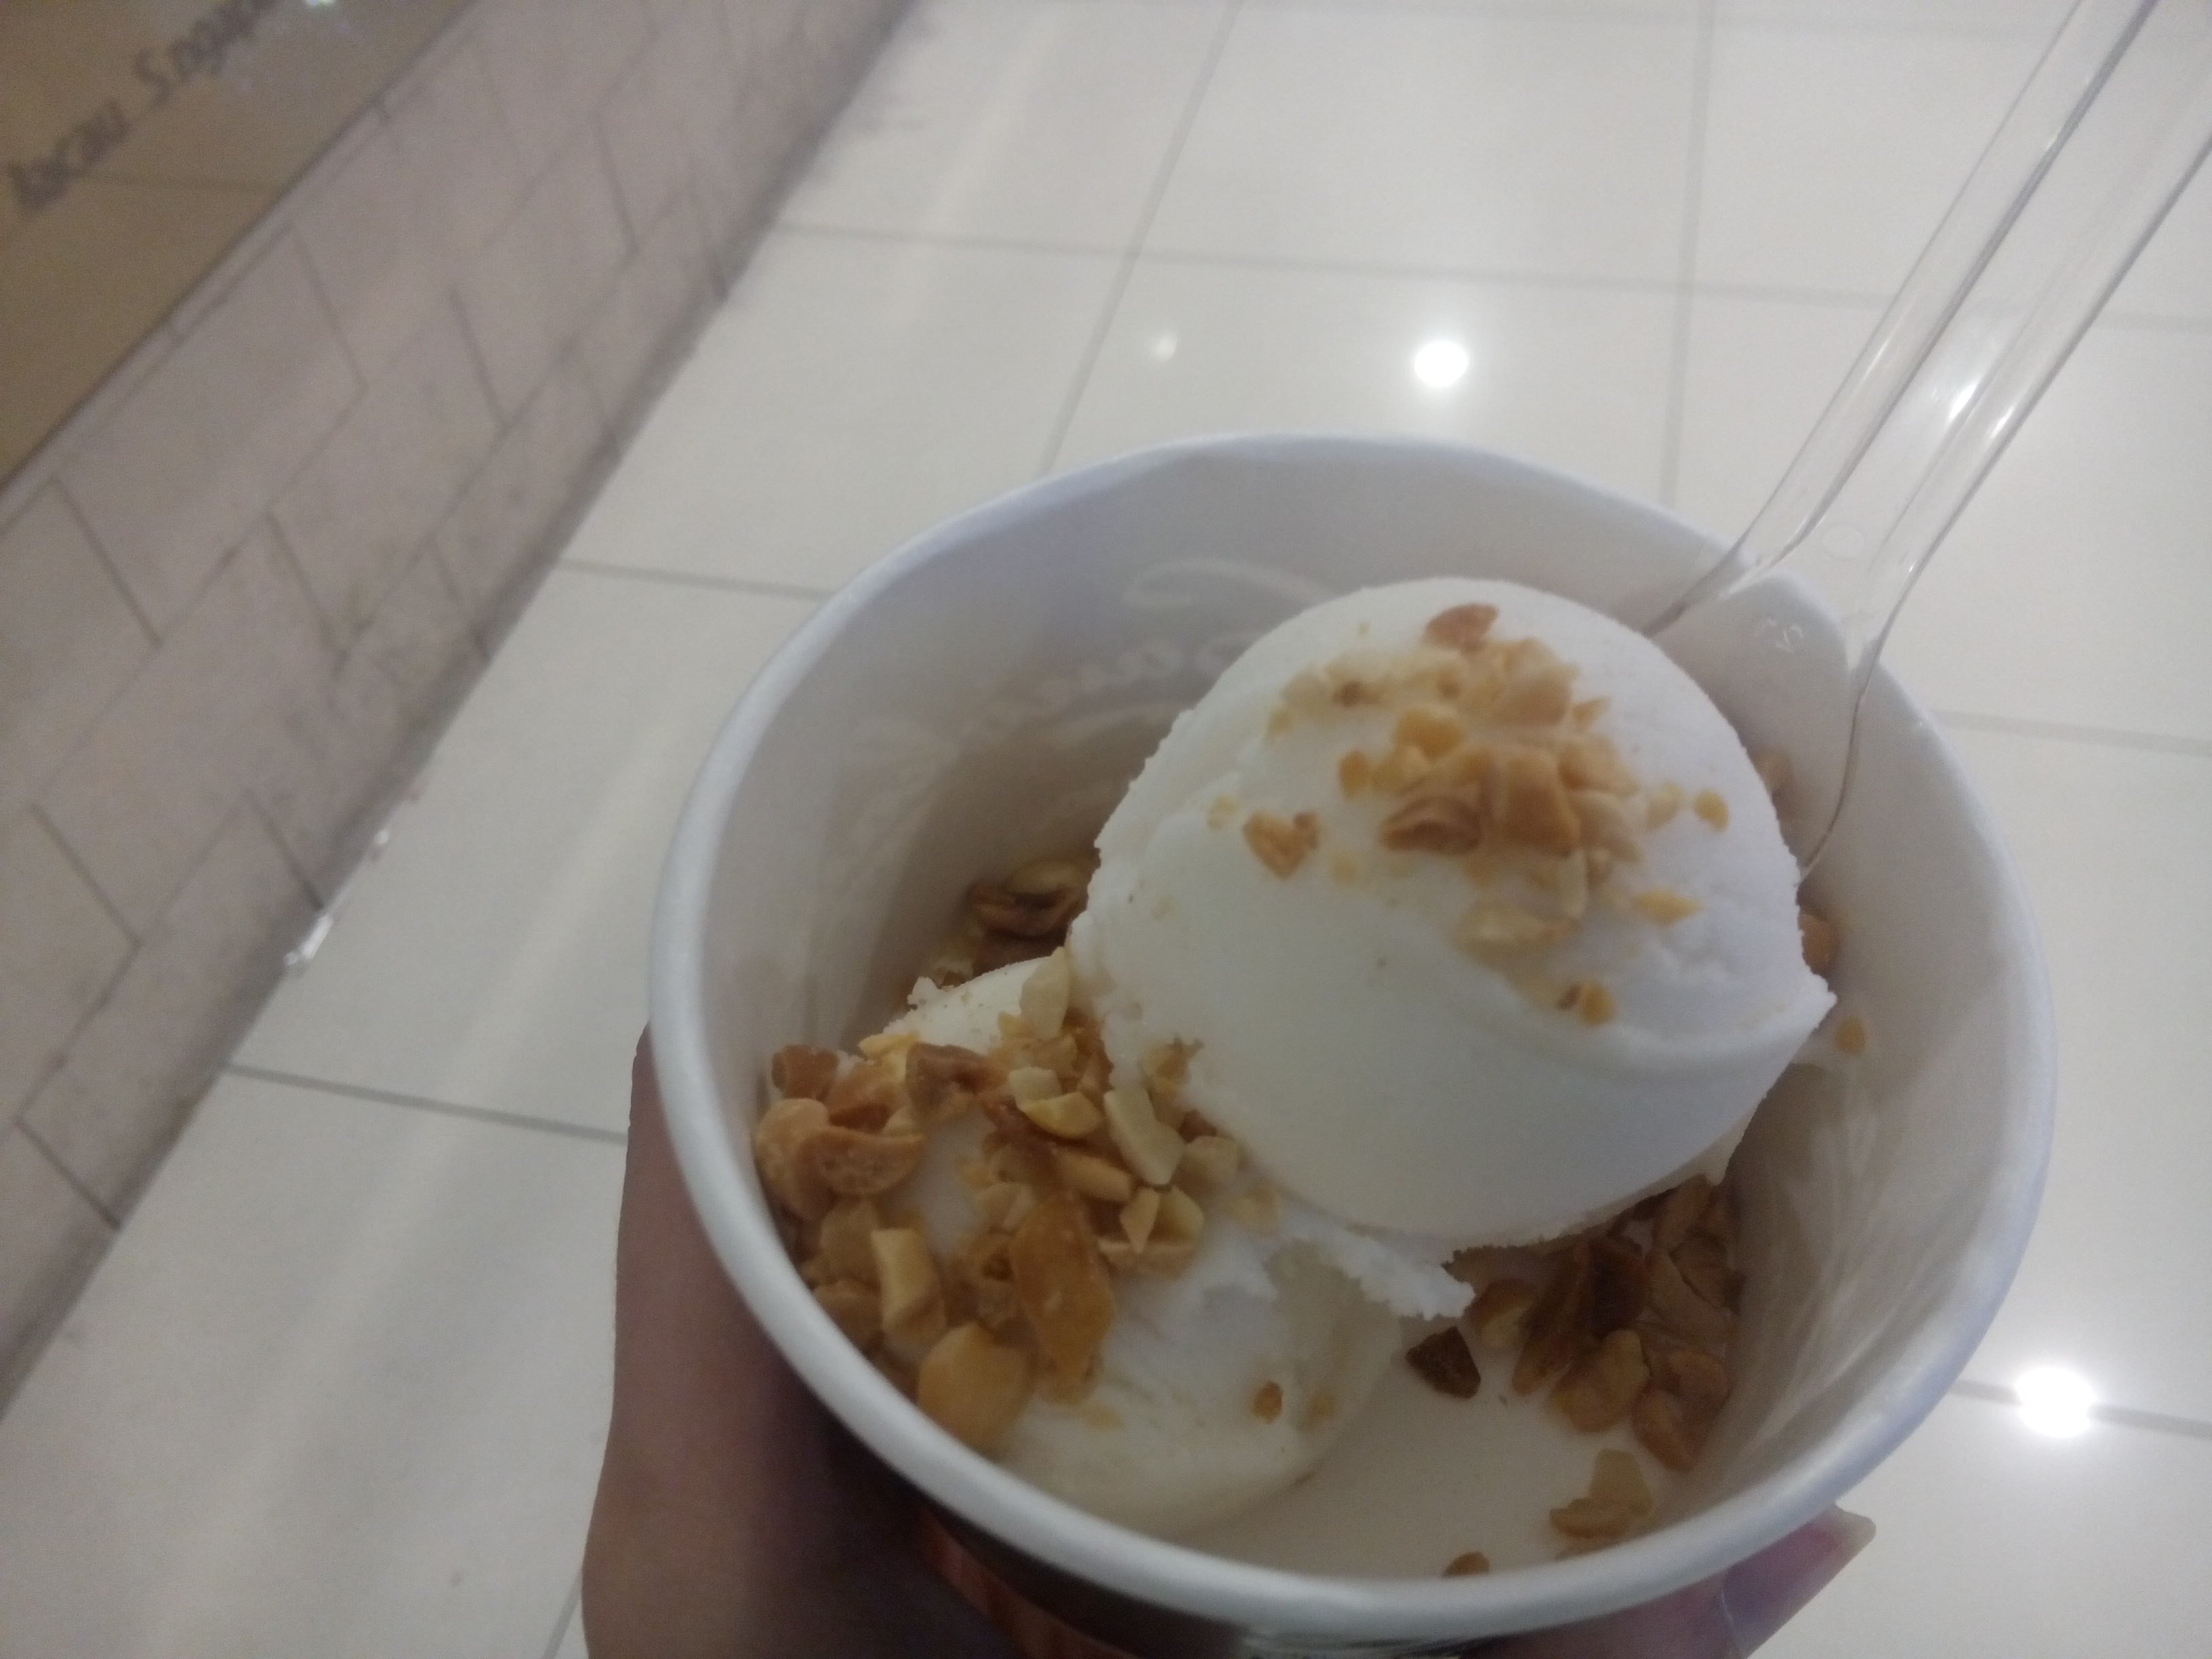 A hand holding a bowl of white ice cream covered in peanuts